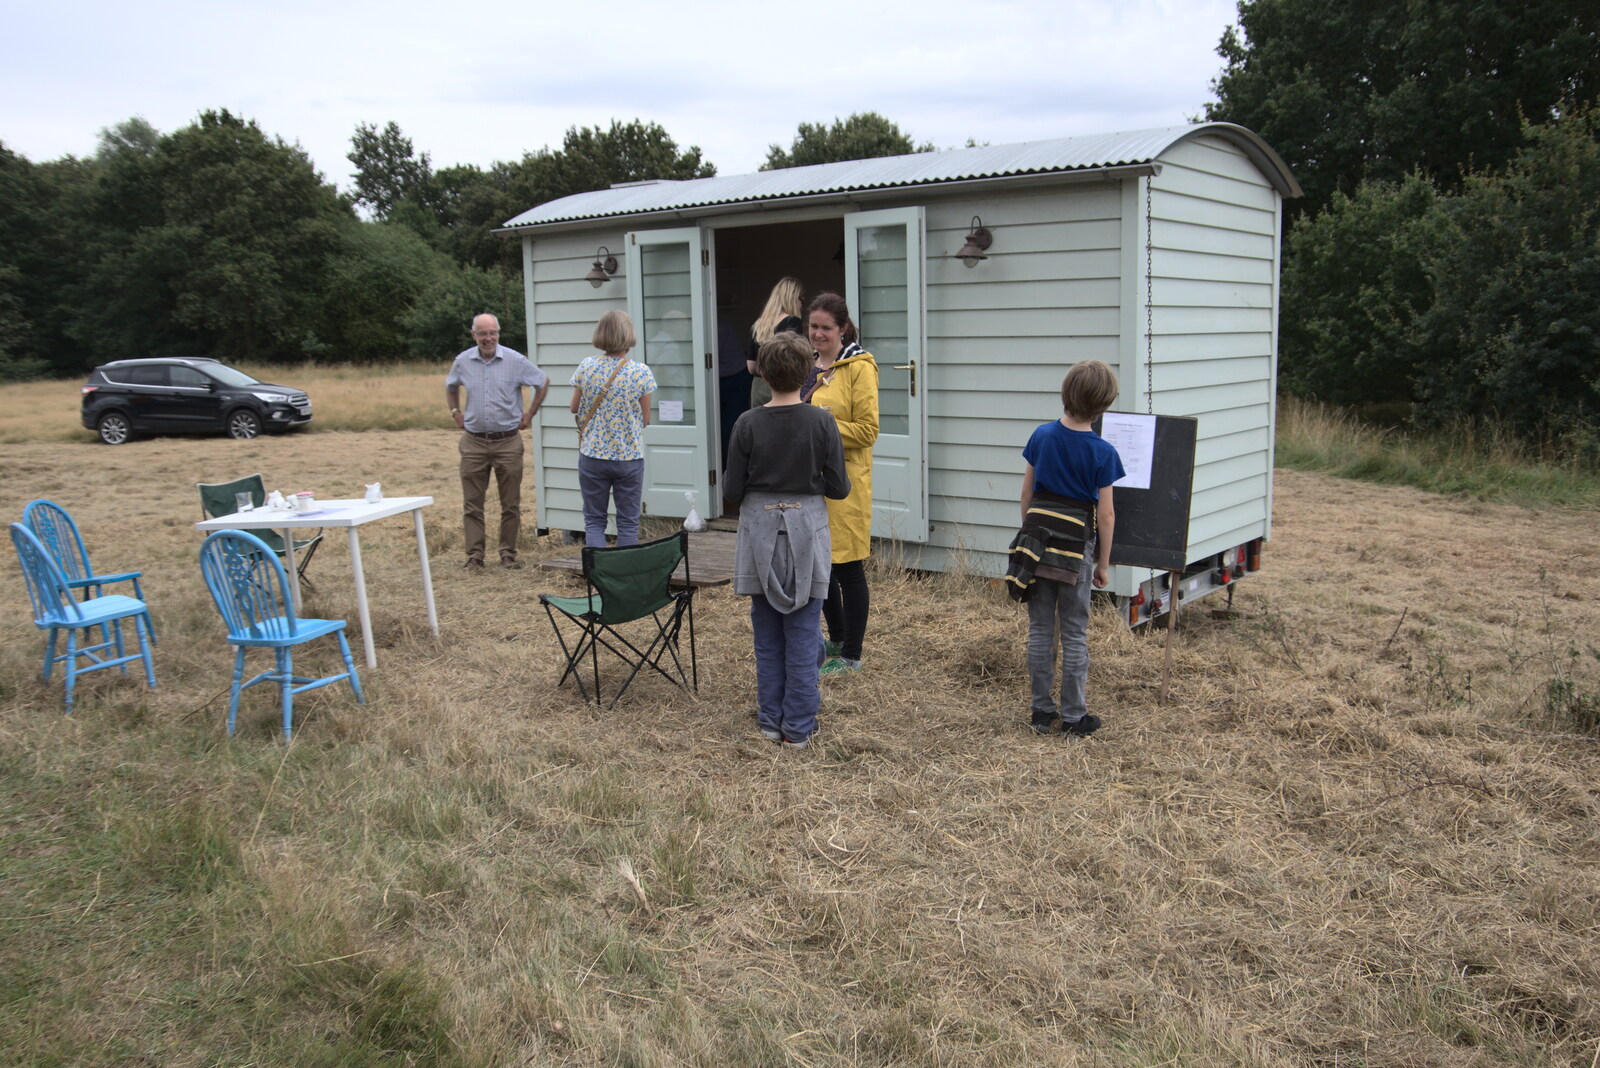 The shepherd hut café from An Open Day at the Windmill, Billingford, Norfolk - 21st August 2021